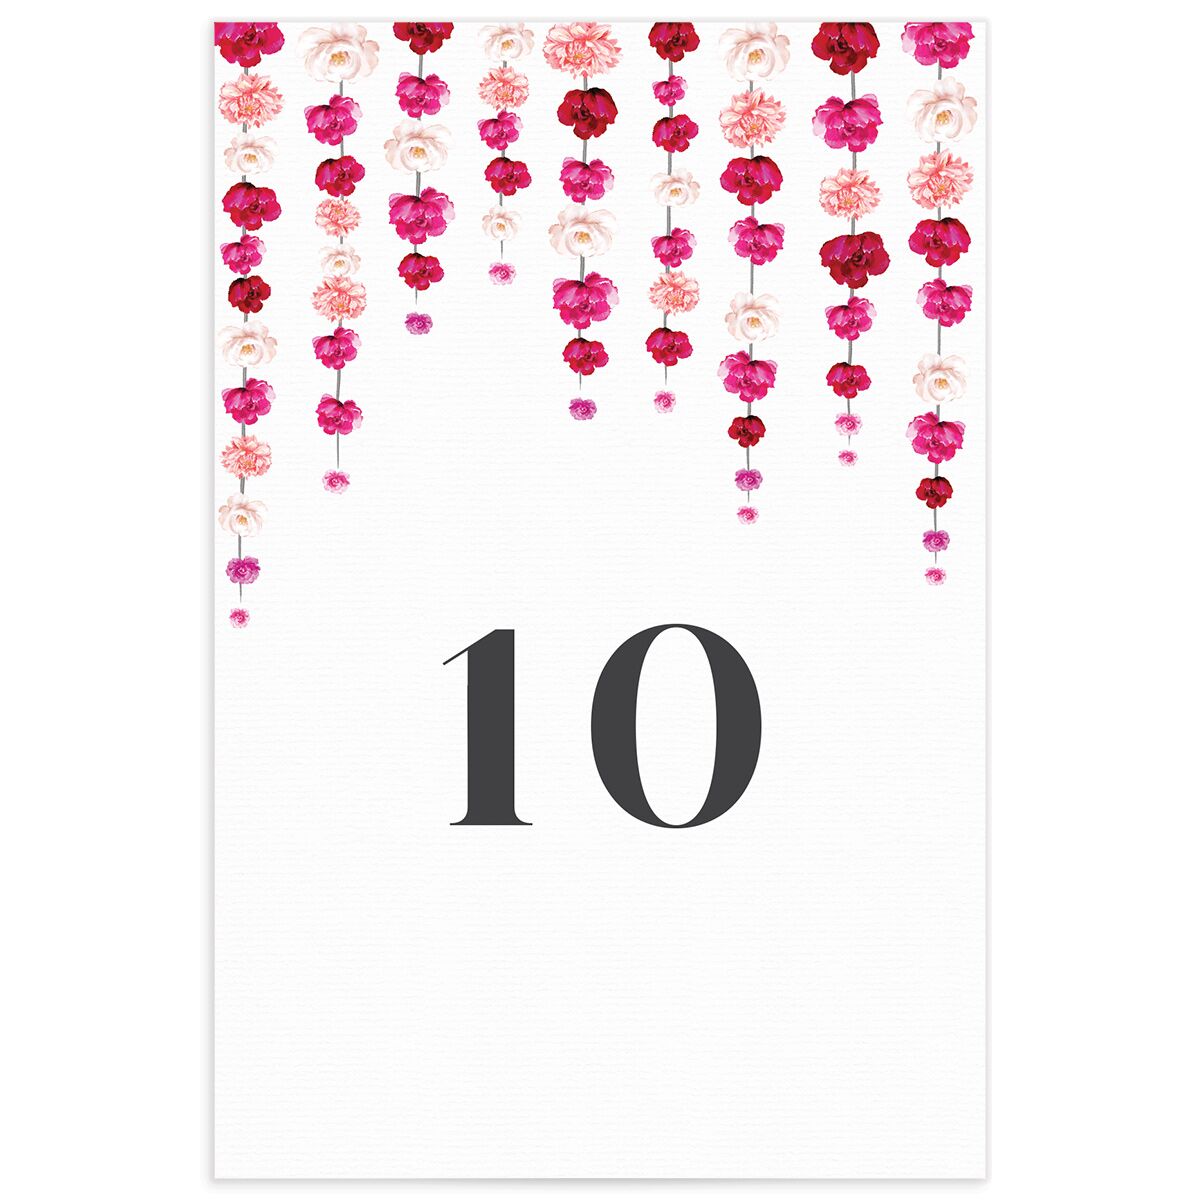 Floral Canopy Table Numbers